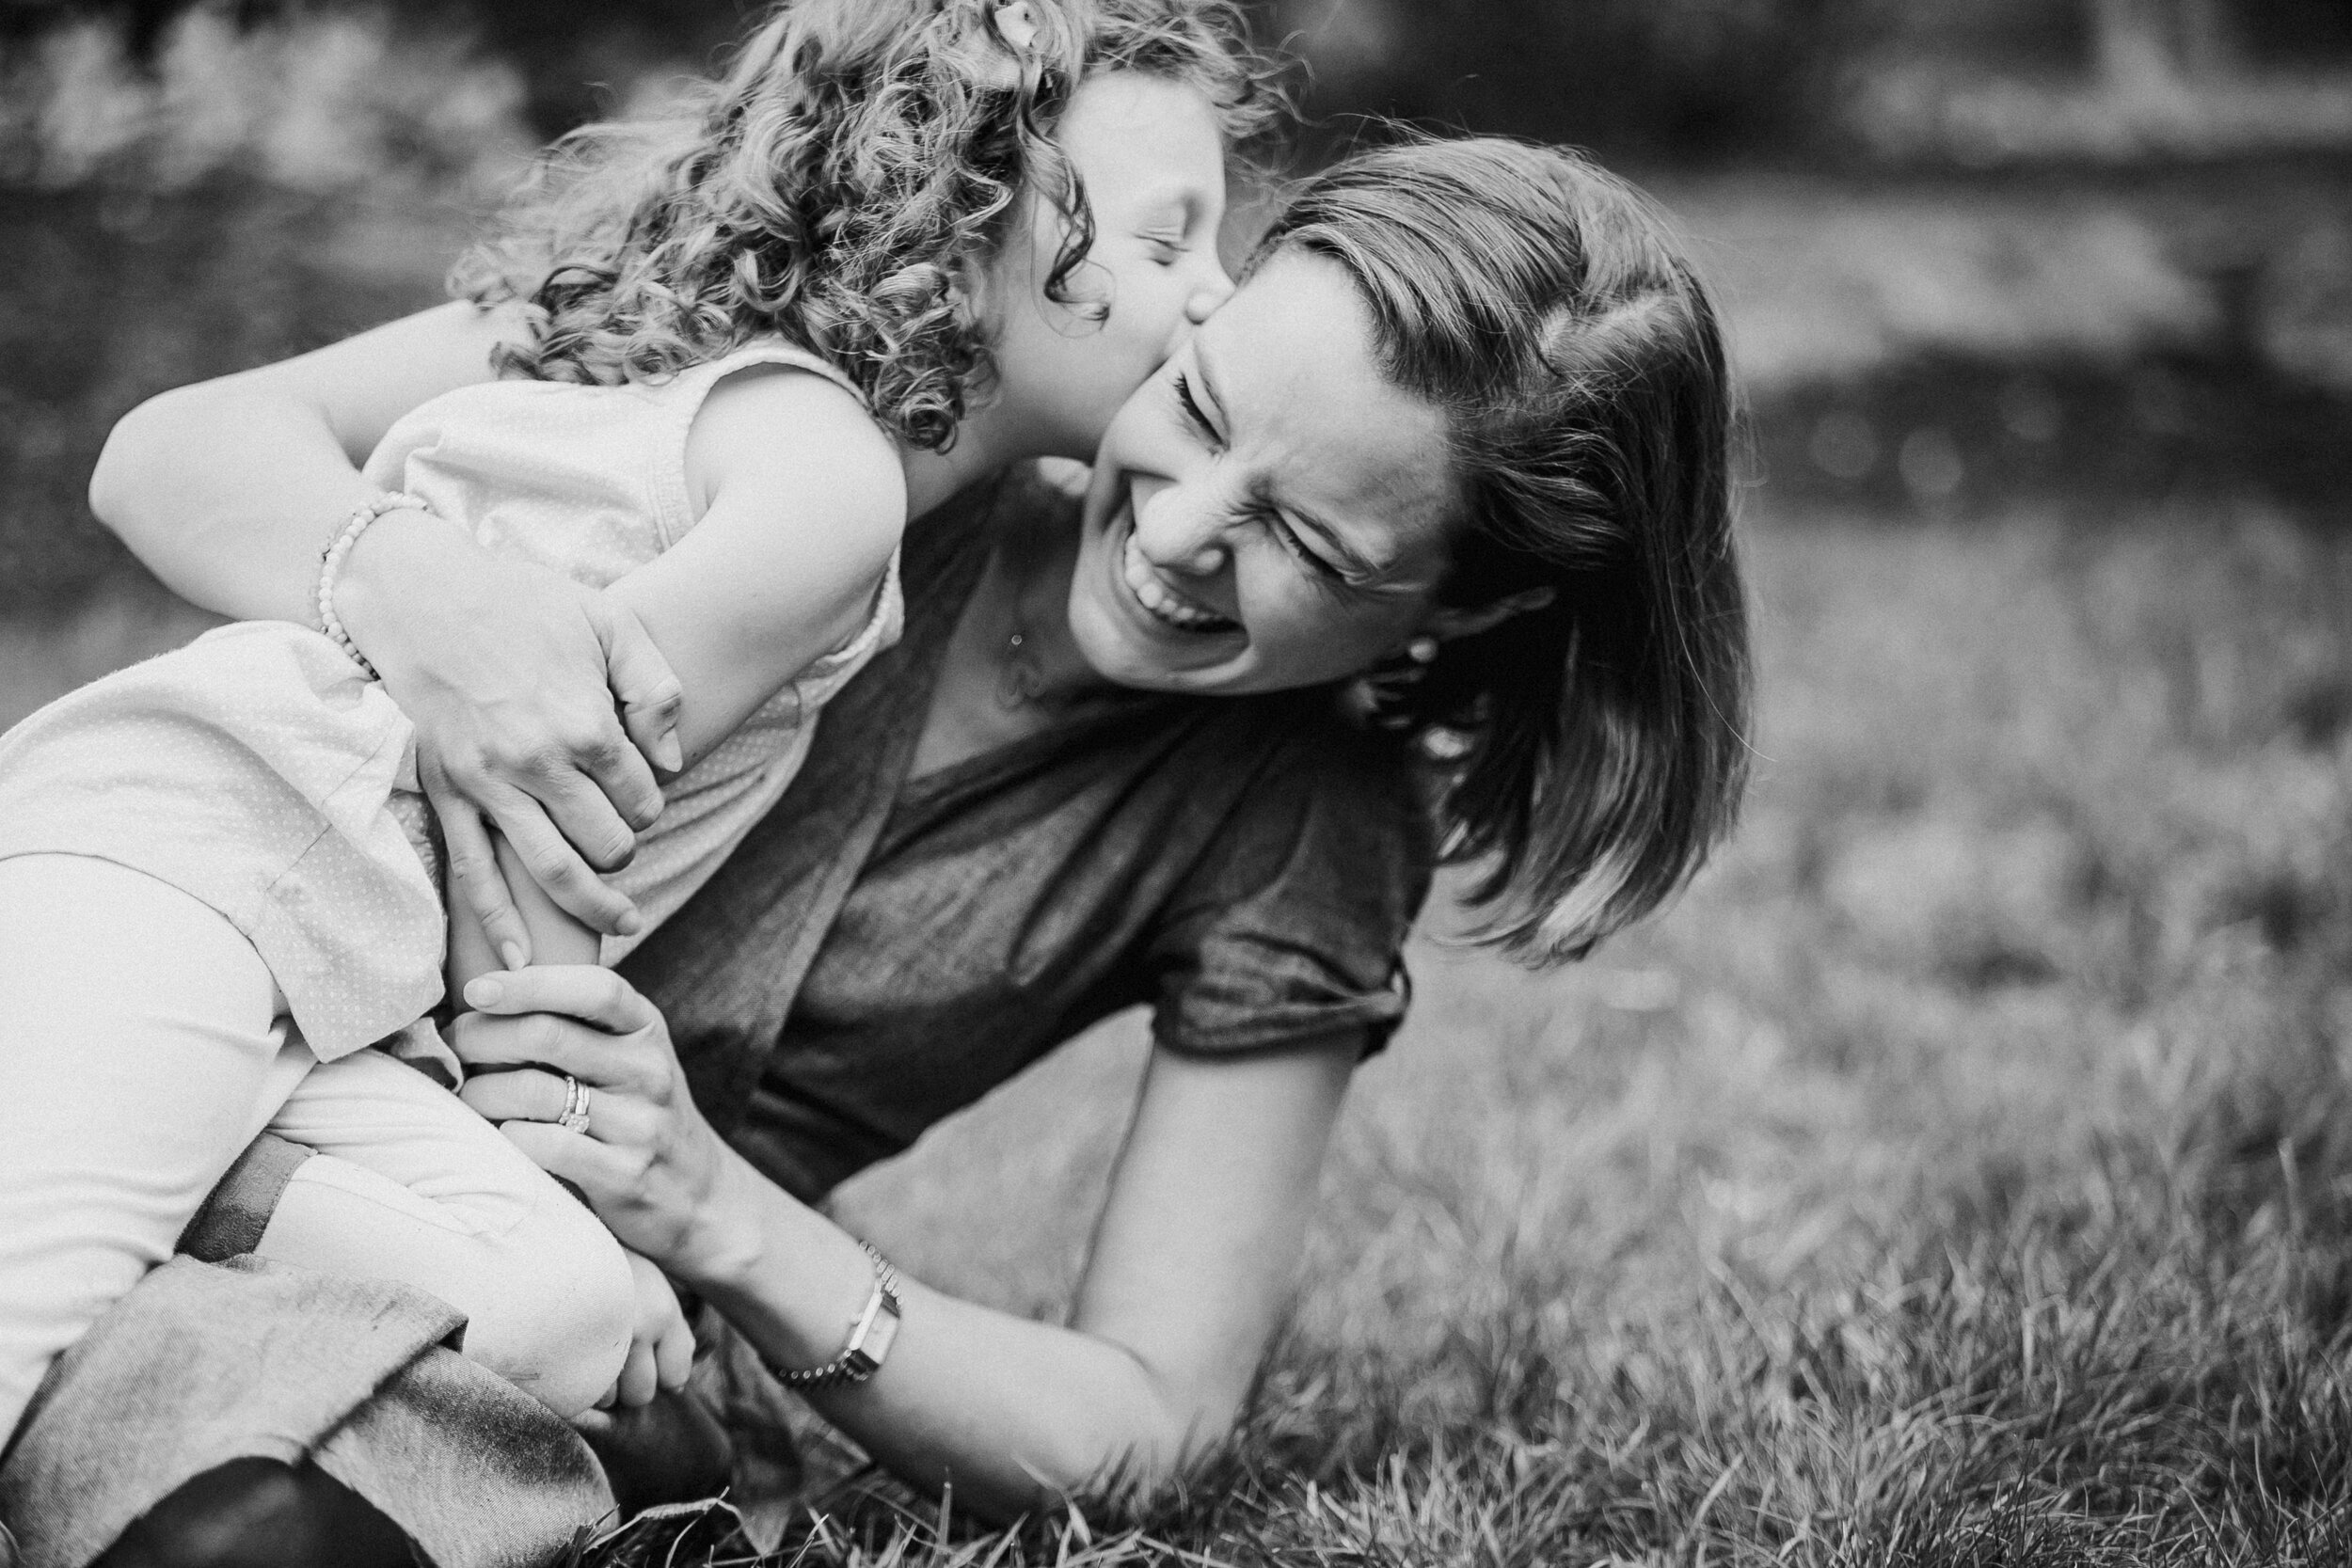 mother-daughter-playing-kissing-henrico-county-virginia.jpg